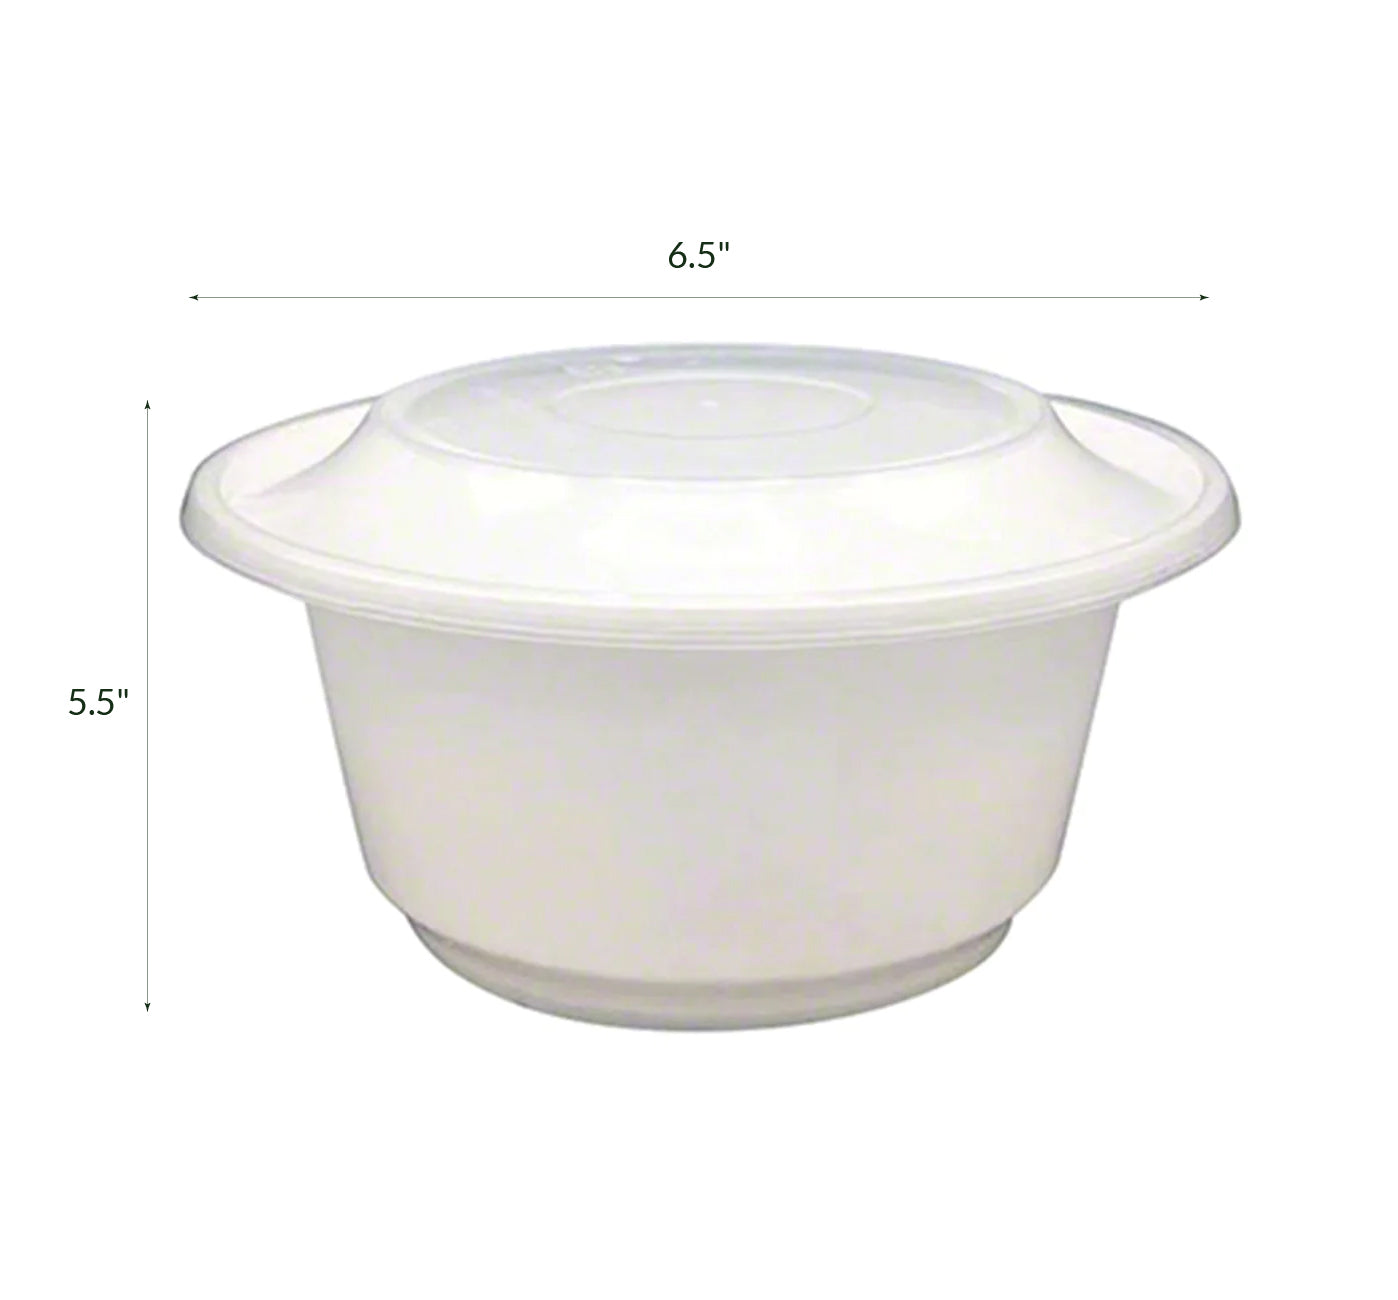 26oz Large Salad Paper Bowls with Lids Disposable Food Containers Hot or  Cold Dish to Go Packaging Great for Take Outs - China Eco Bowls, Round  Paper Bowl